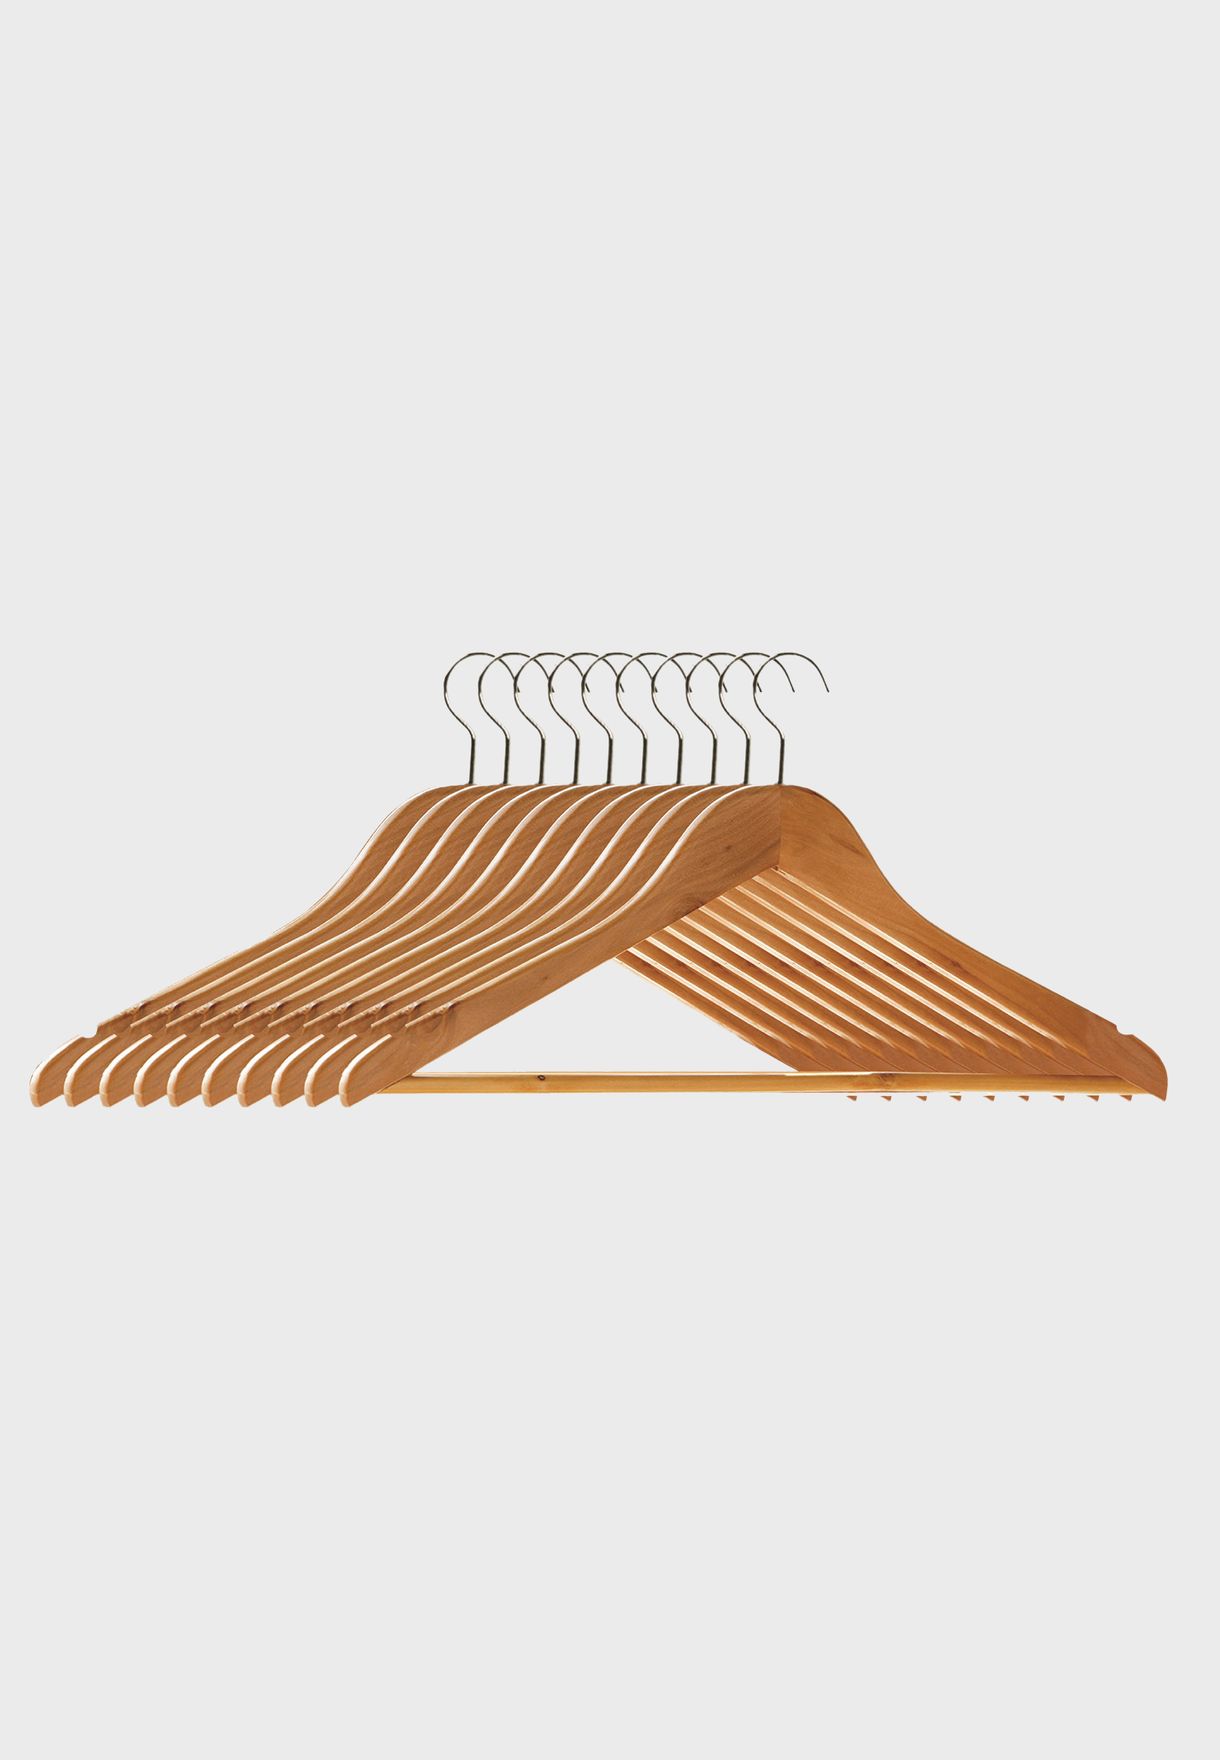 Wooden Set Of 10 Wooden Clothes Hangers